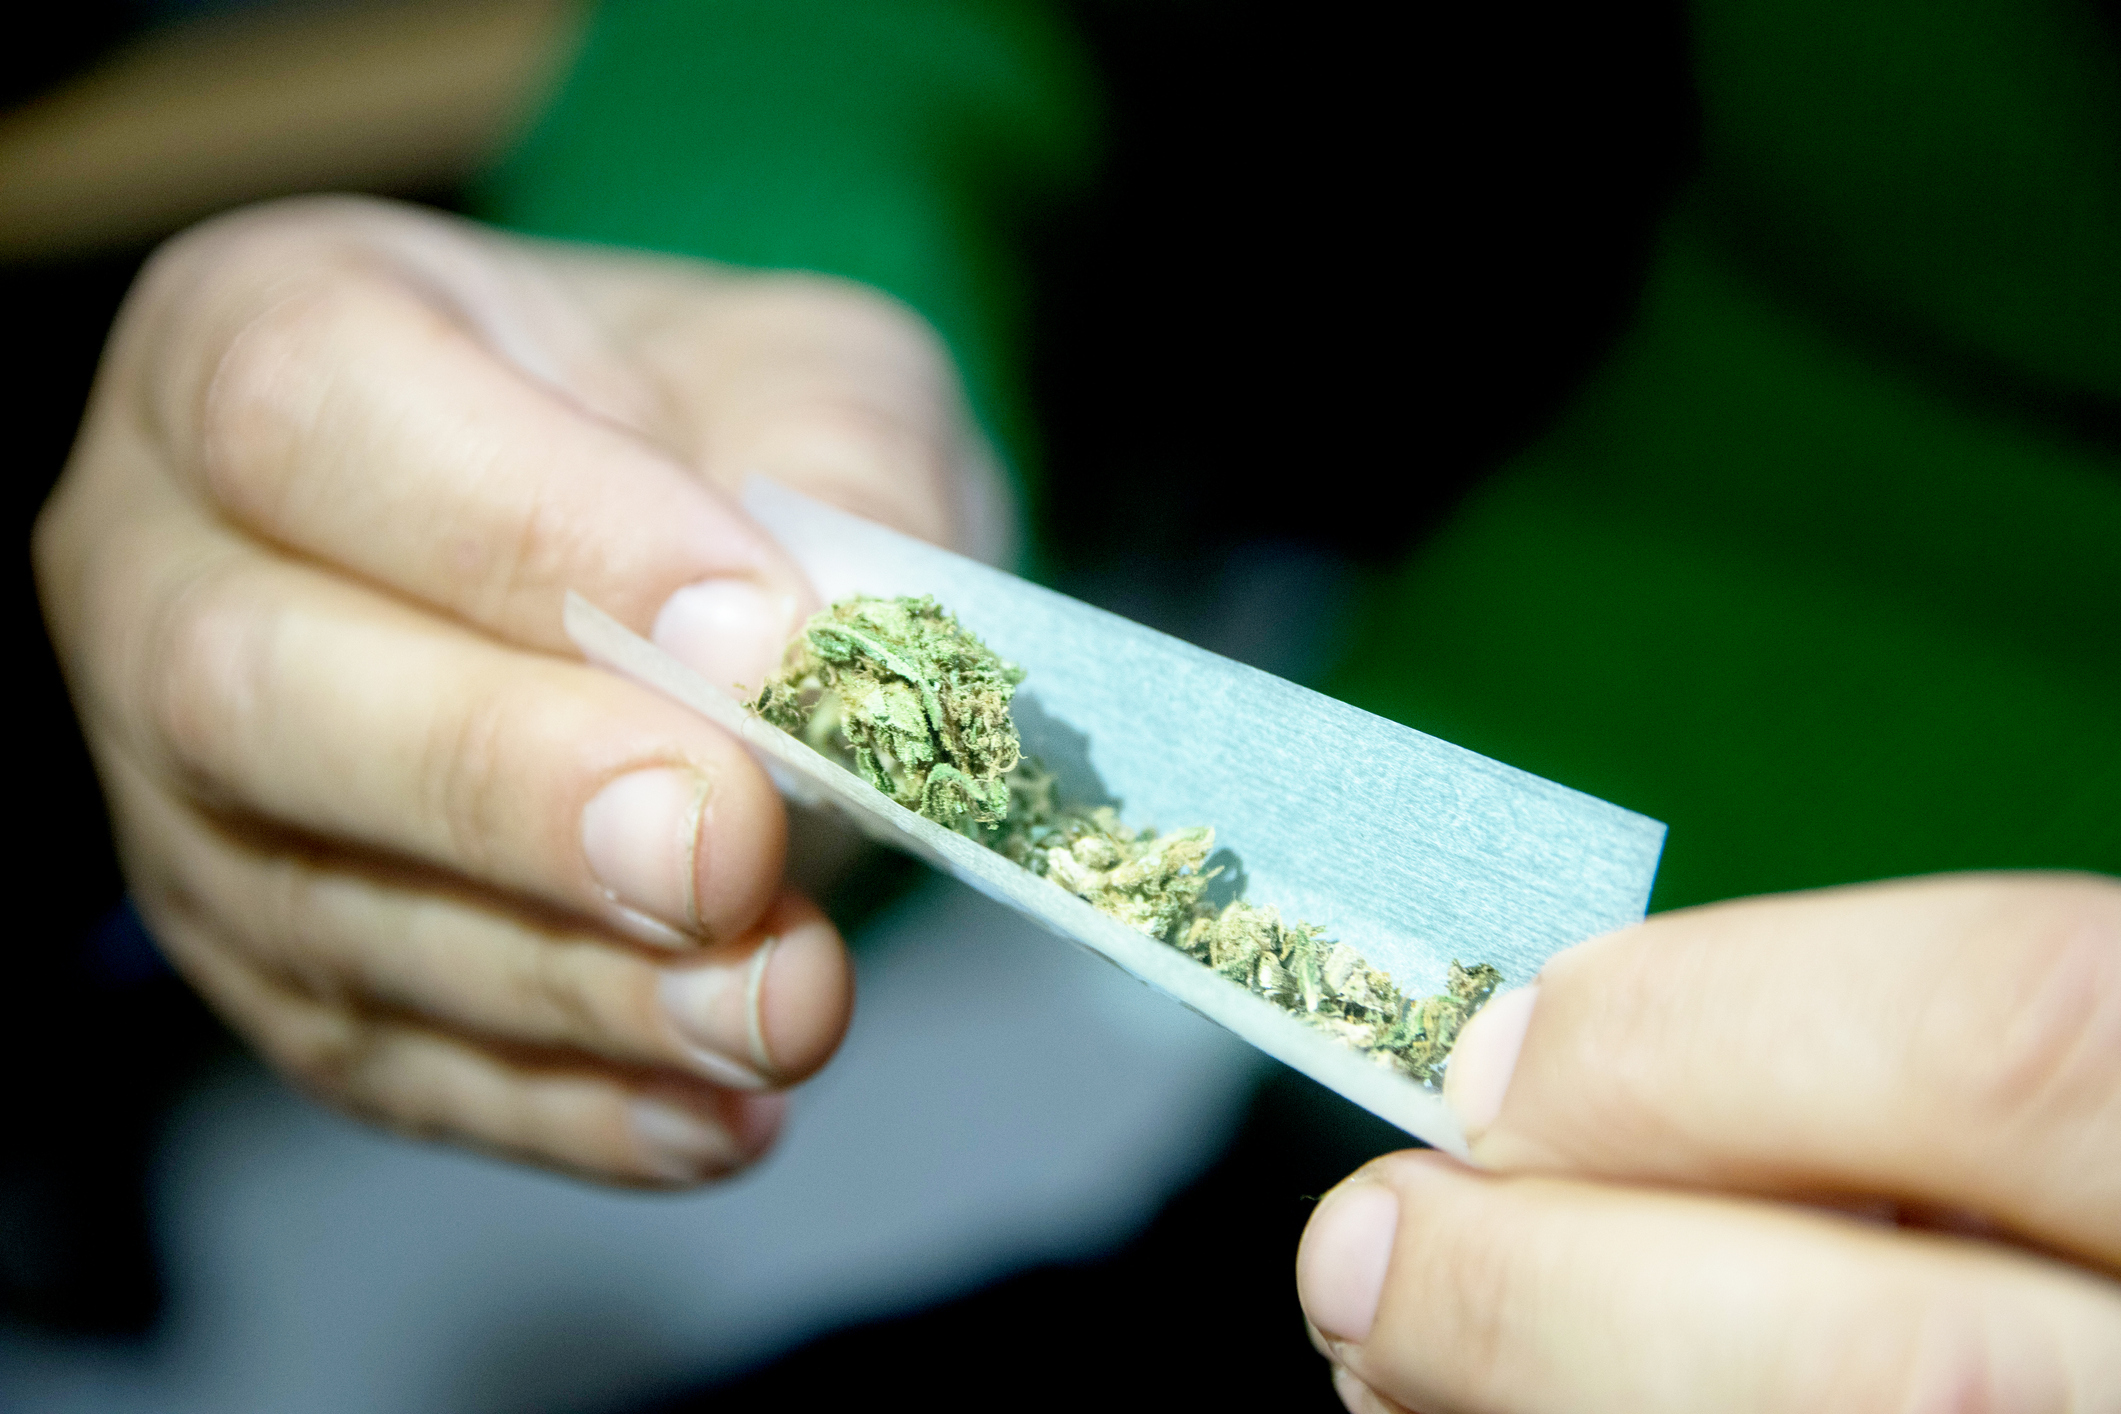 Article image for Canberrans can now use and possess cannabis under ACT’s new laws